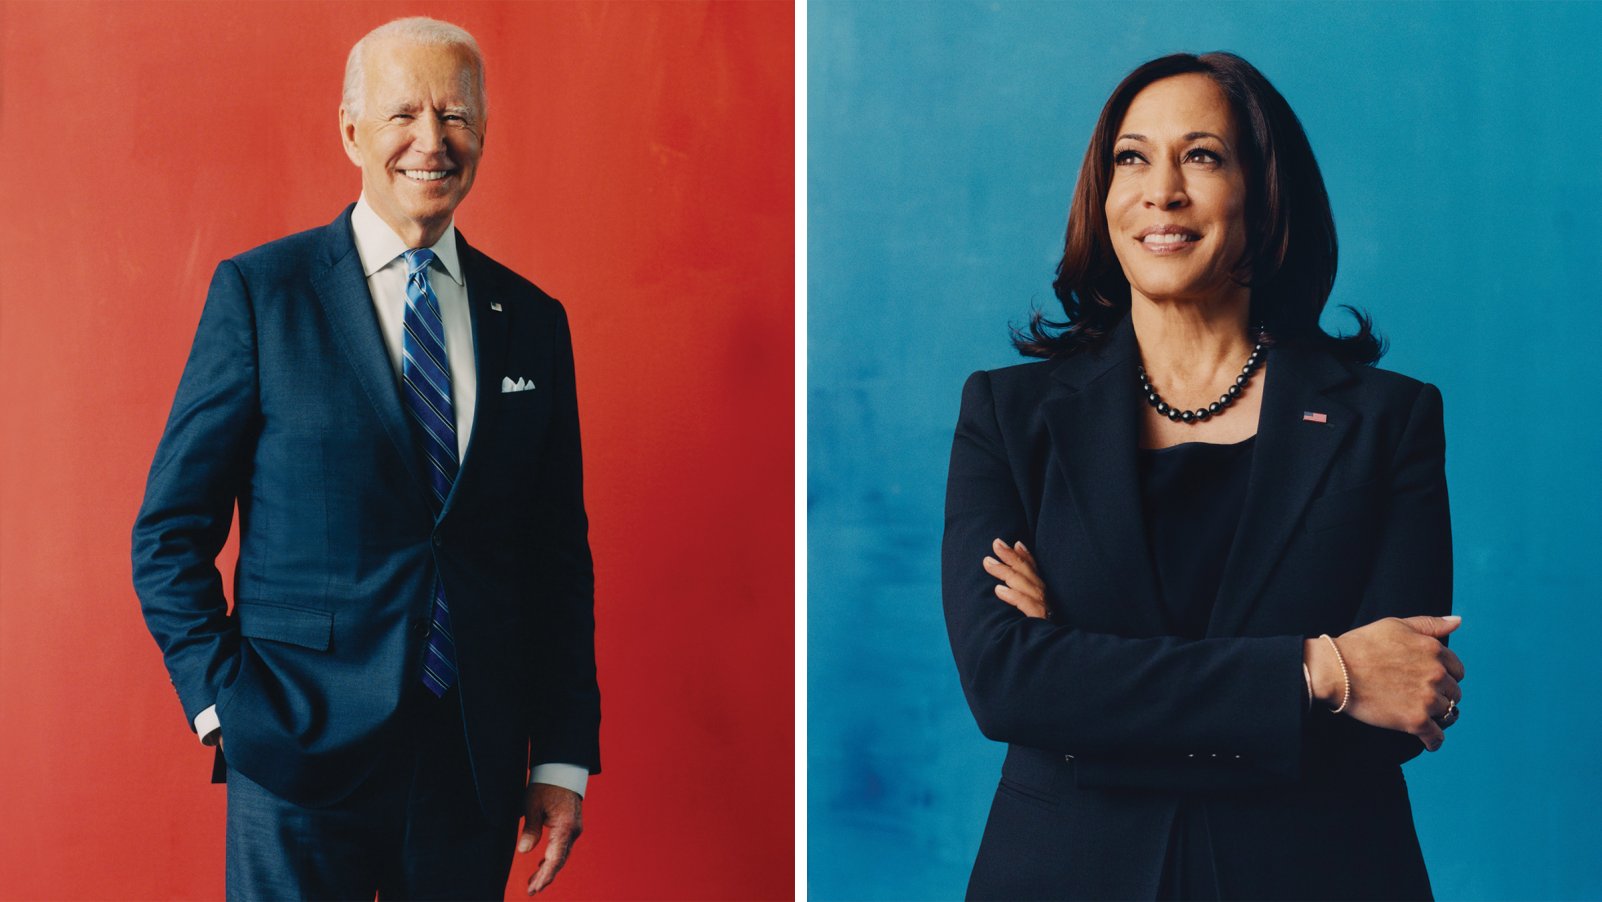 Joe Biden and Kamala Harris jointly named Time's 'Person of the Year'